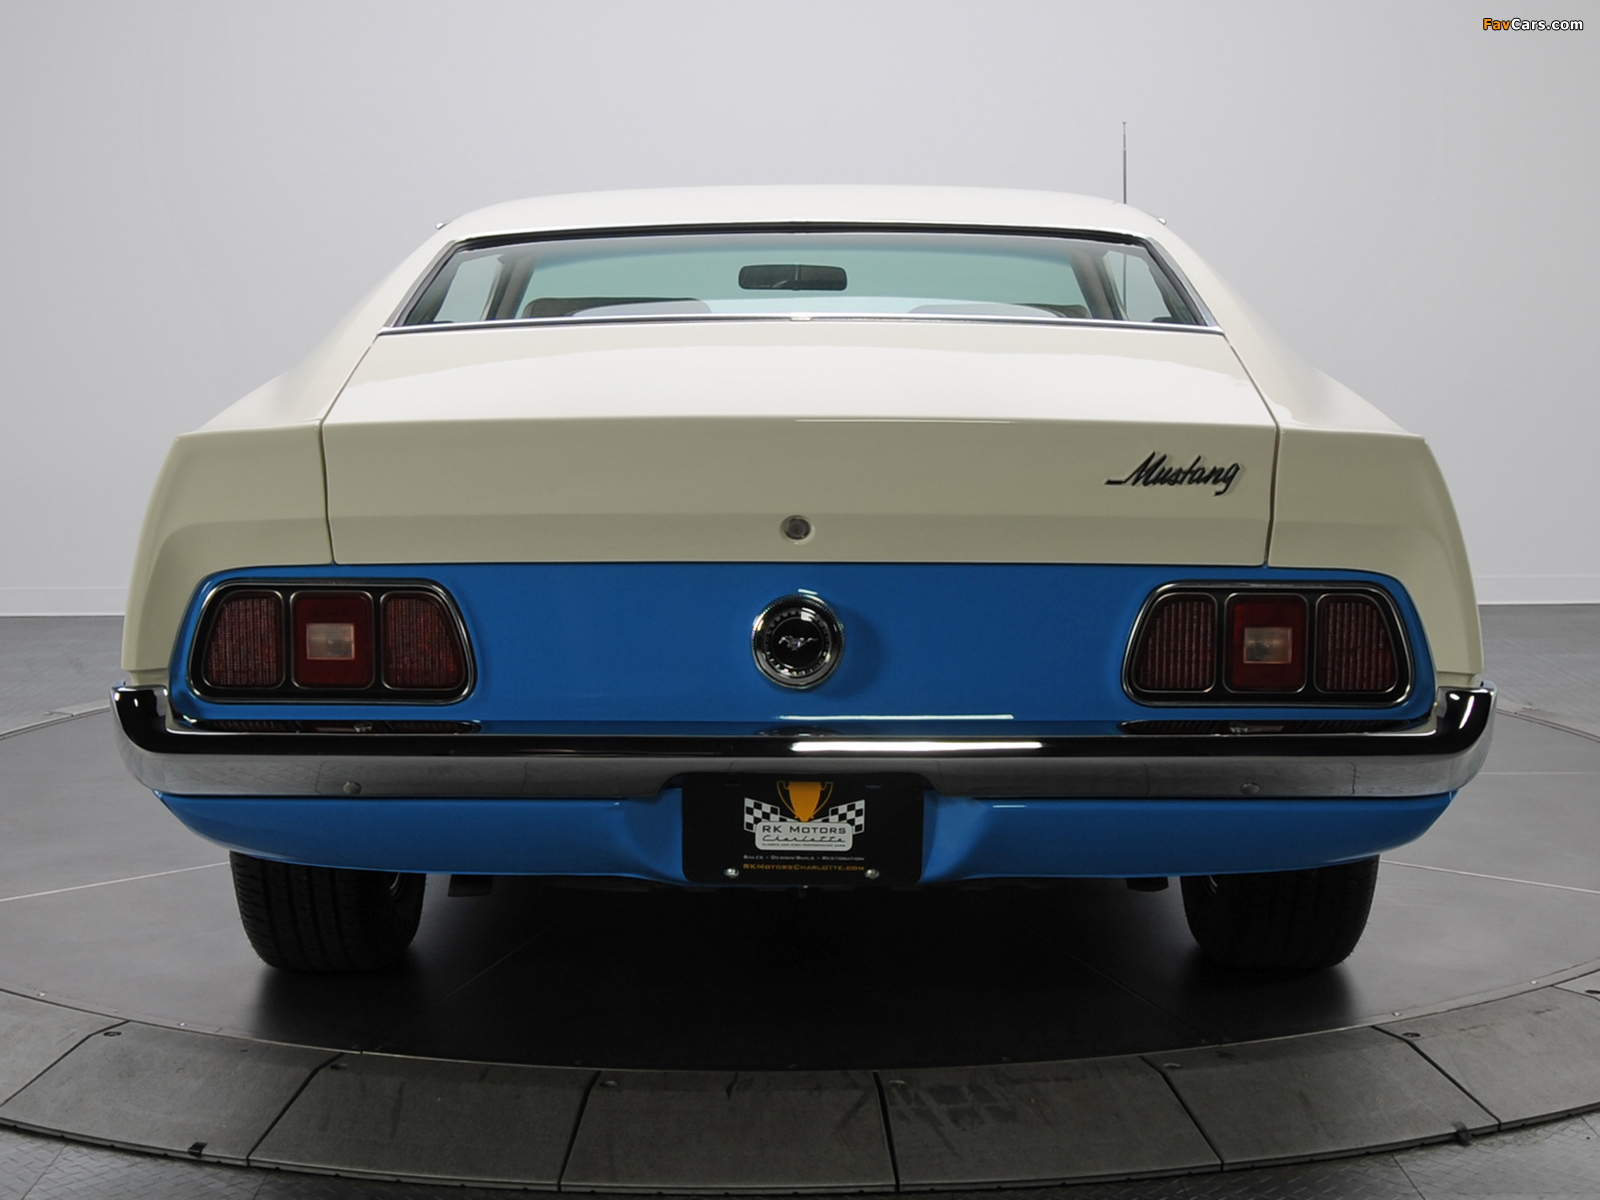 Mustang Sprint Sportsroof 1972 pictures (1600 x 1200)